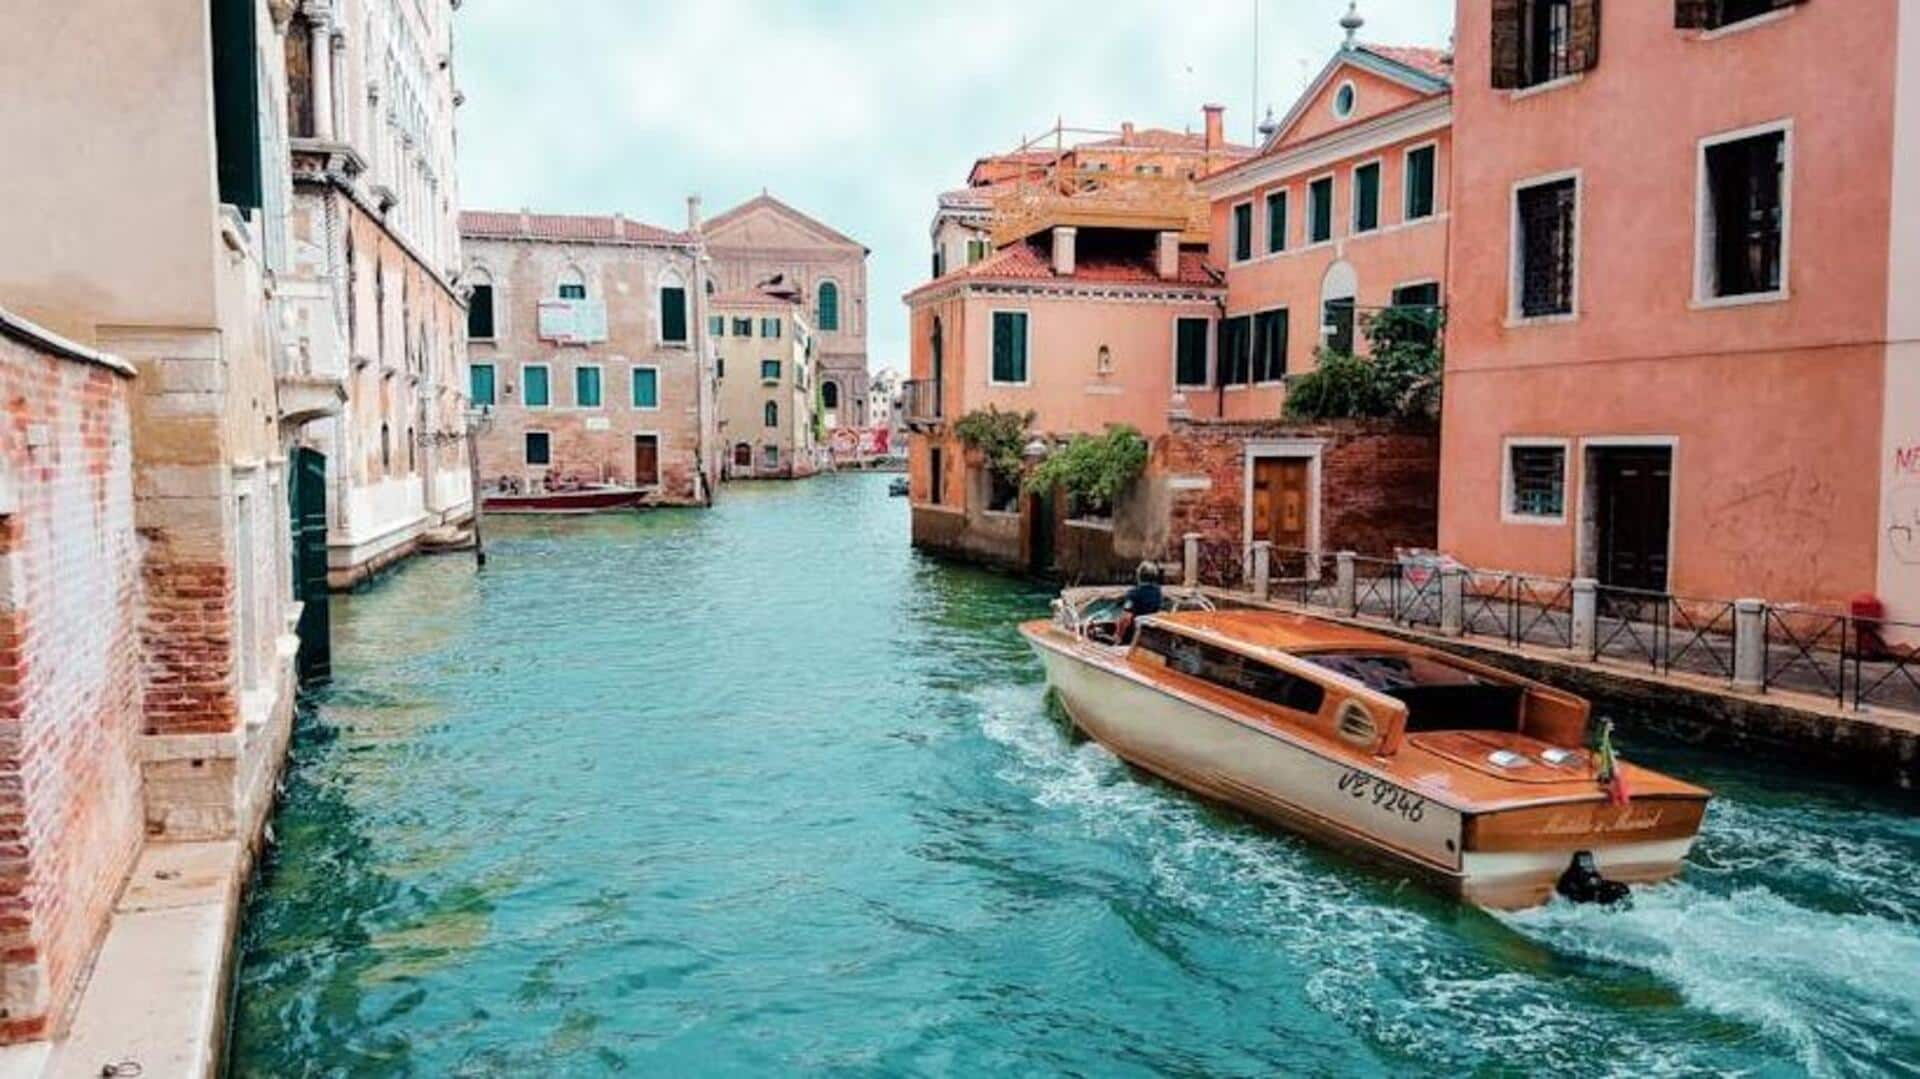 Venice: Explore the city of water and wonder